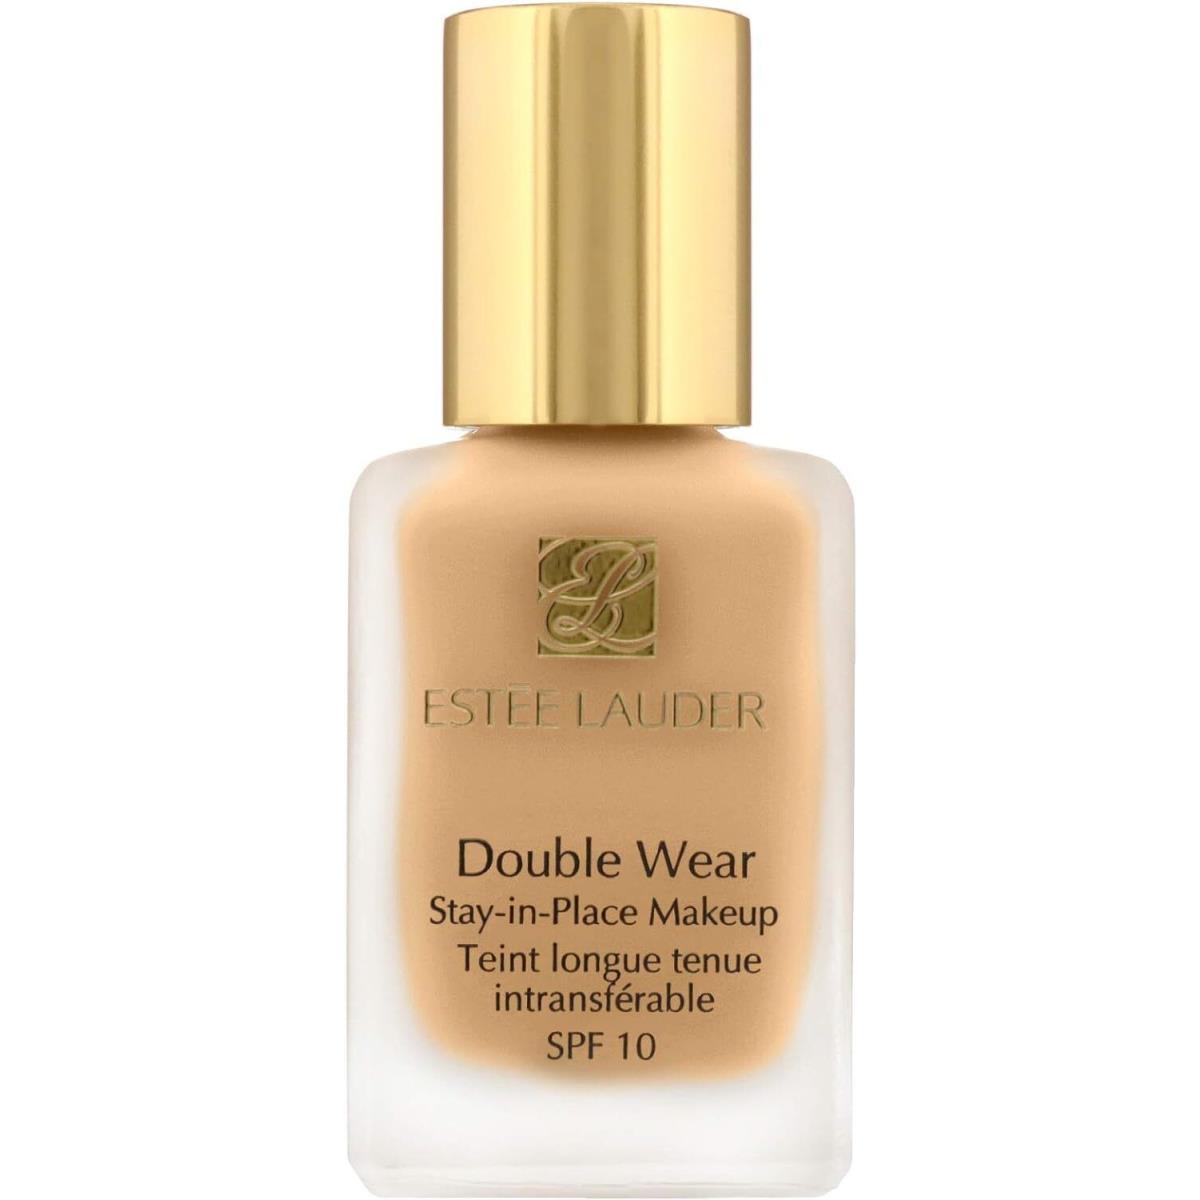 Estee Lauder Double Wear Stay-in-place Makeup Foundation No. 2n2 Buff